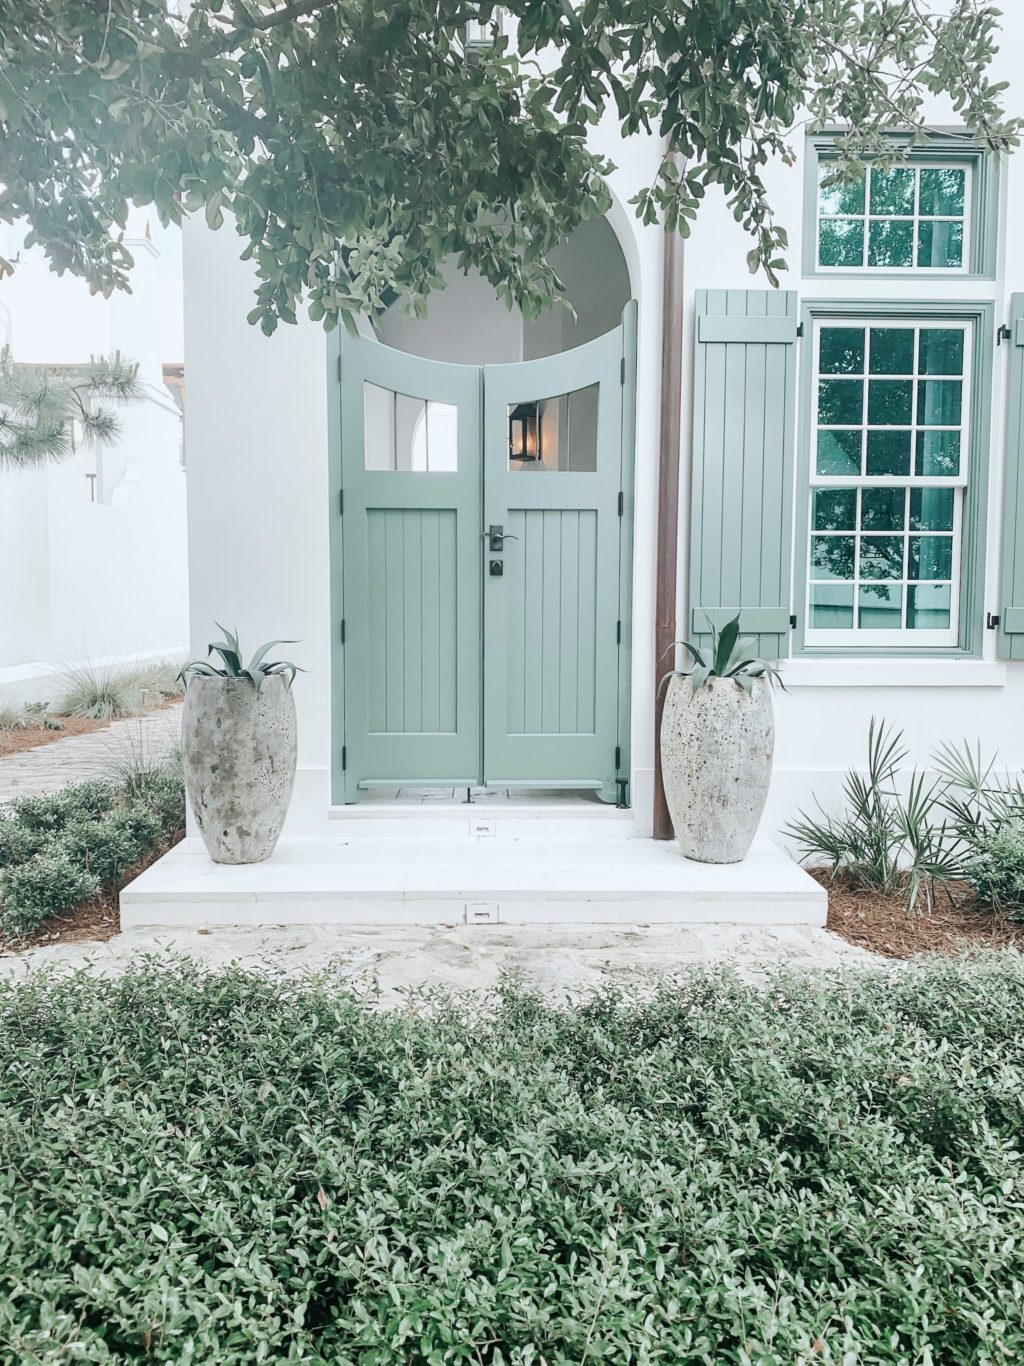 A beautiful white house with a green door, two potted plants are next to the doorway.